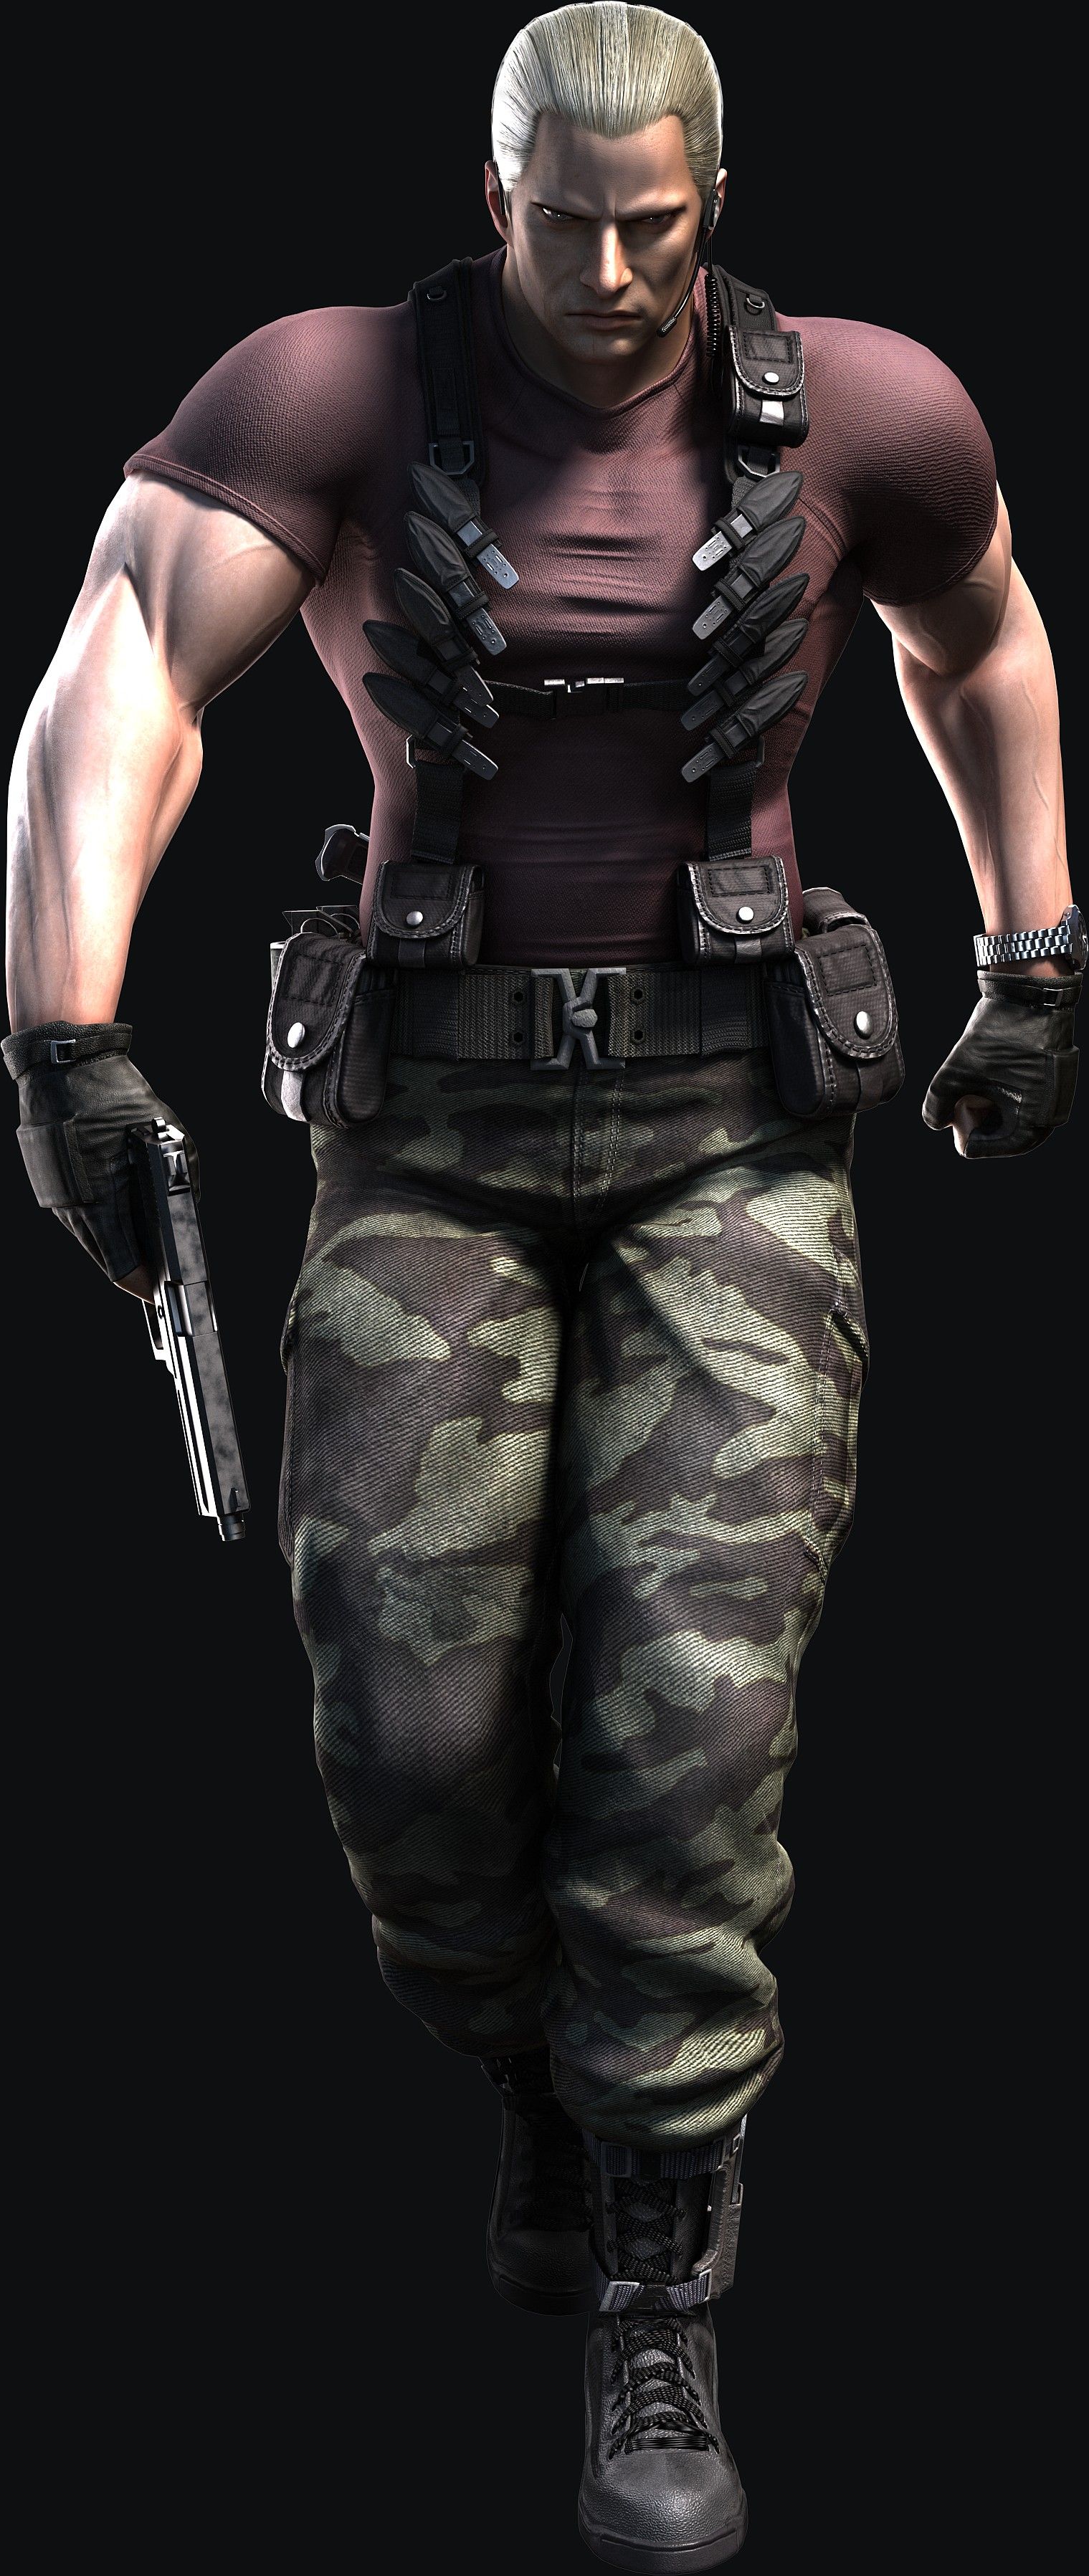 Jack Krauser screenshots, image and picture